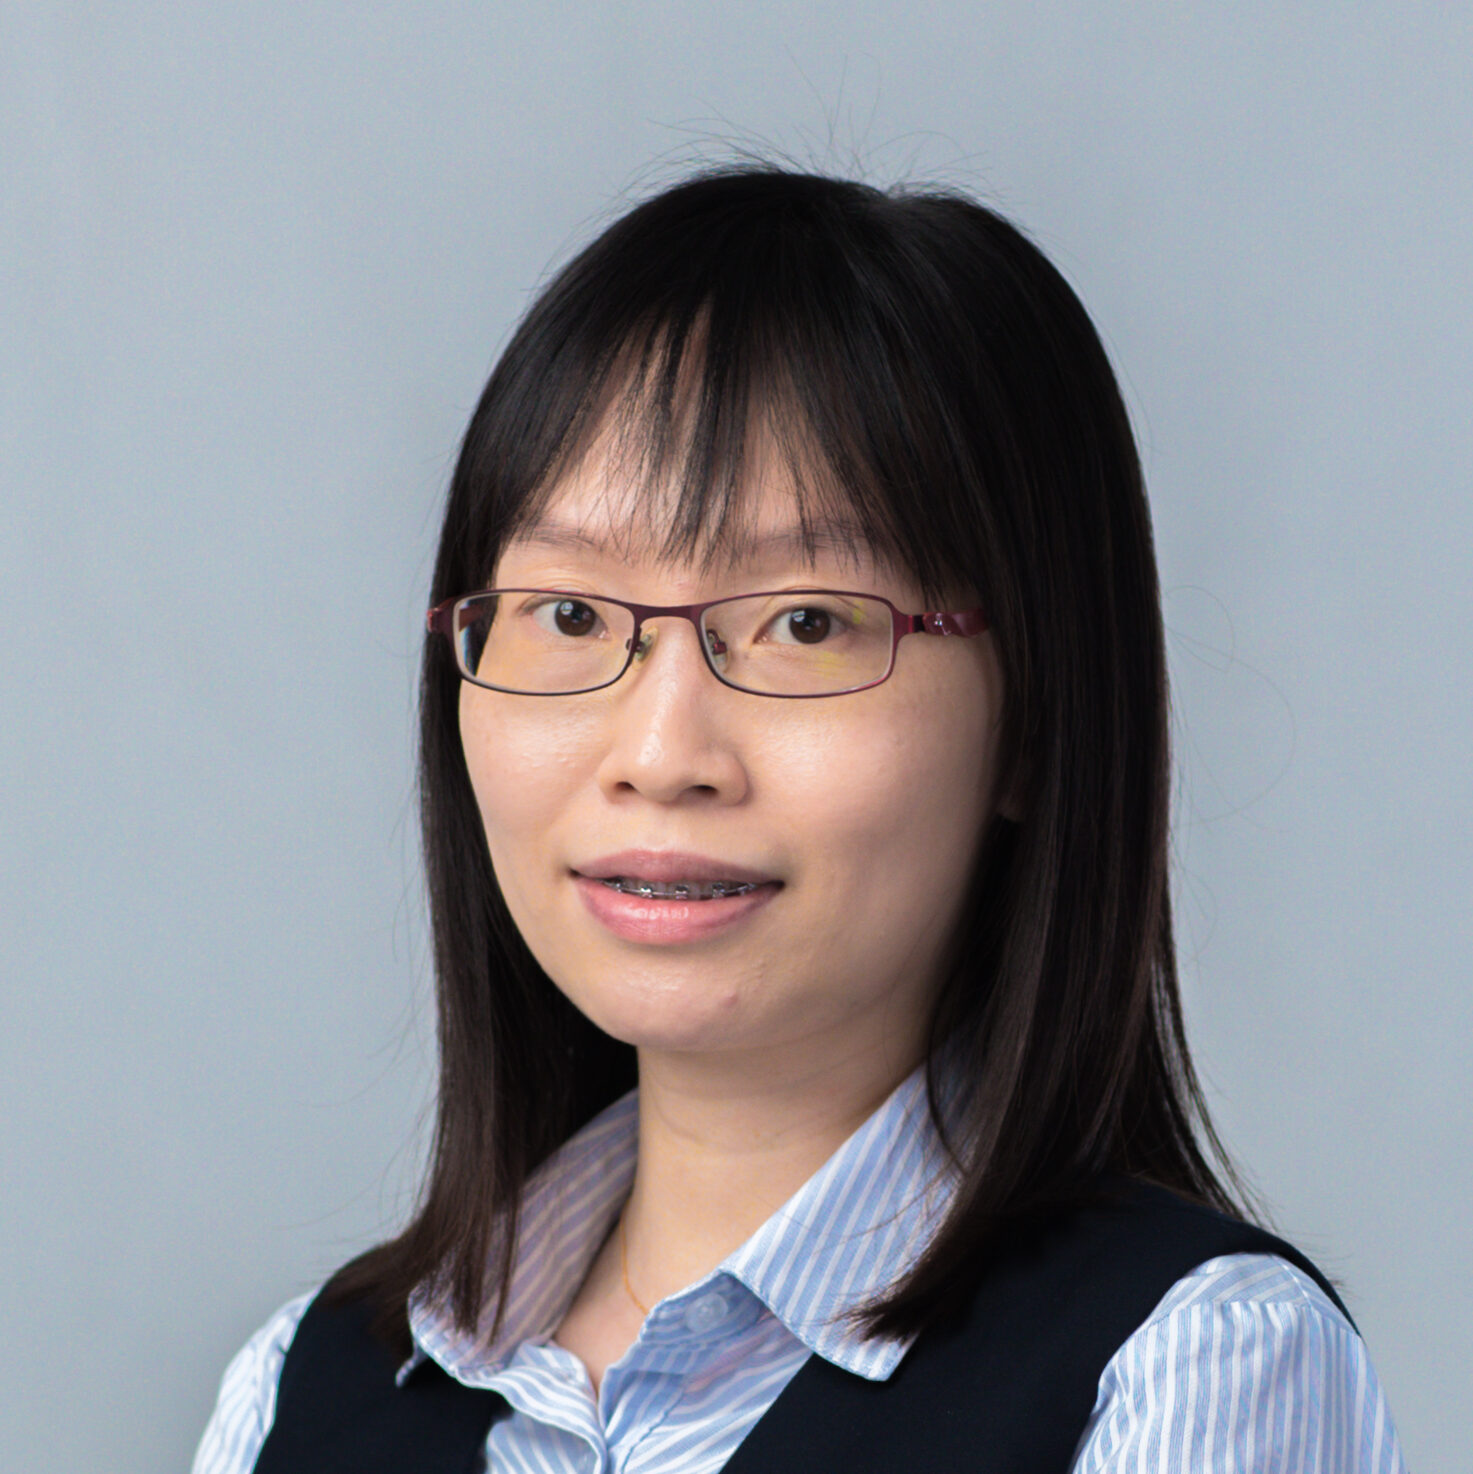 Portrait of Carrie Ye, an elementary TA support staff at Clifford International School in Guangzhou, Panyu, China